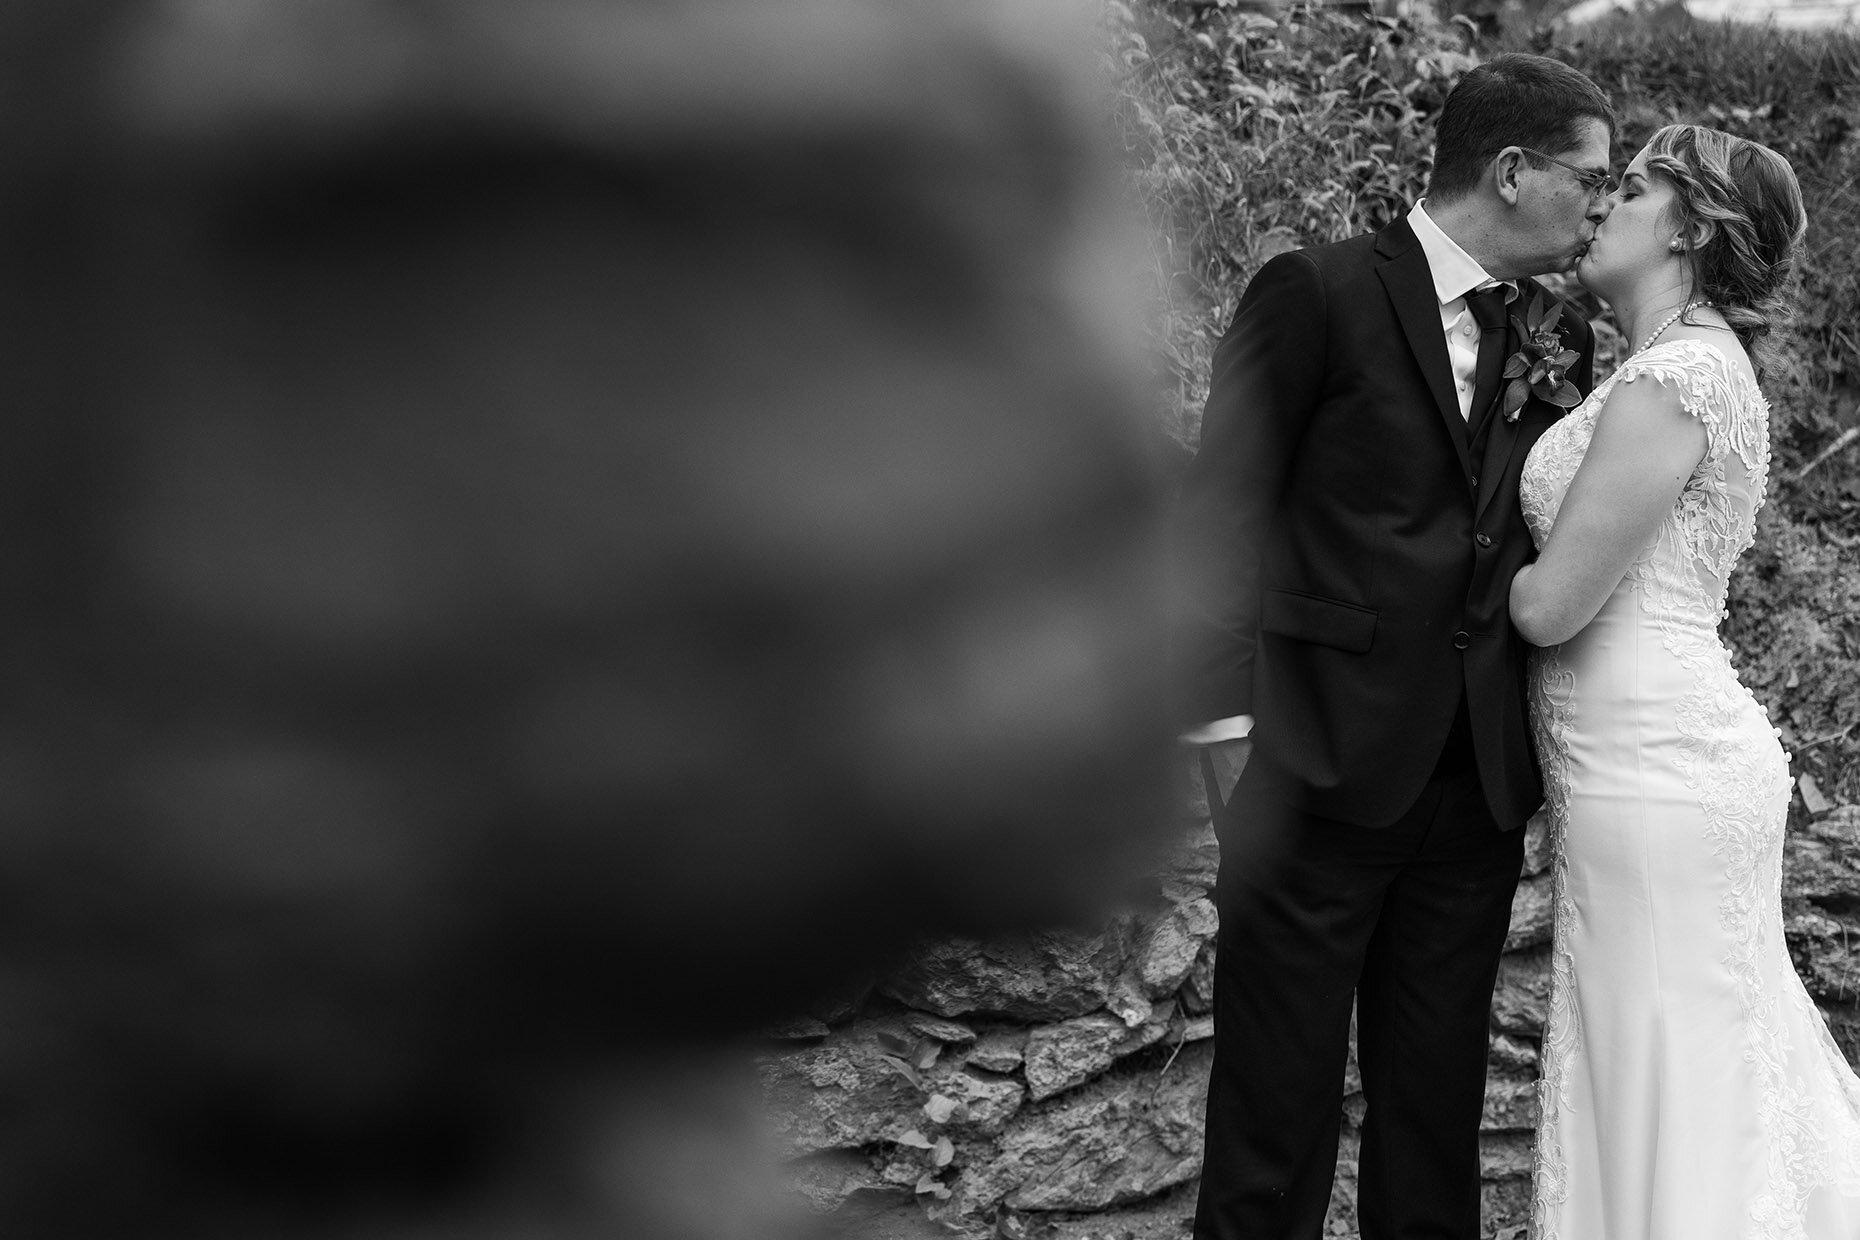 Out of focus wall in black and white with bride &amp; groom 